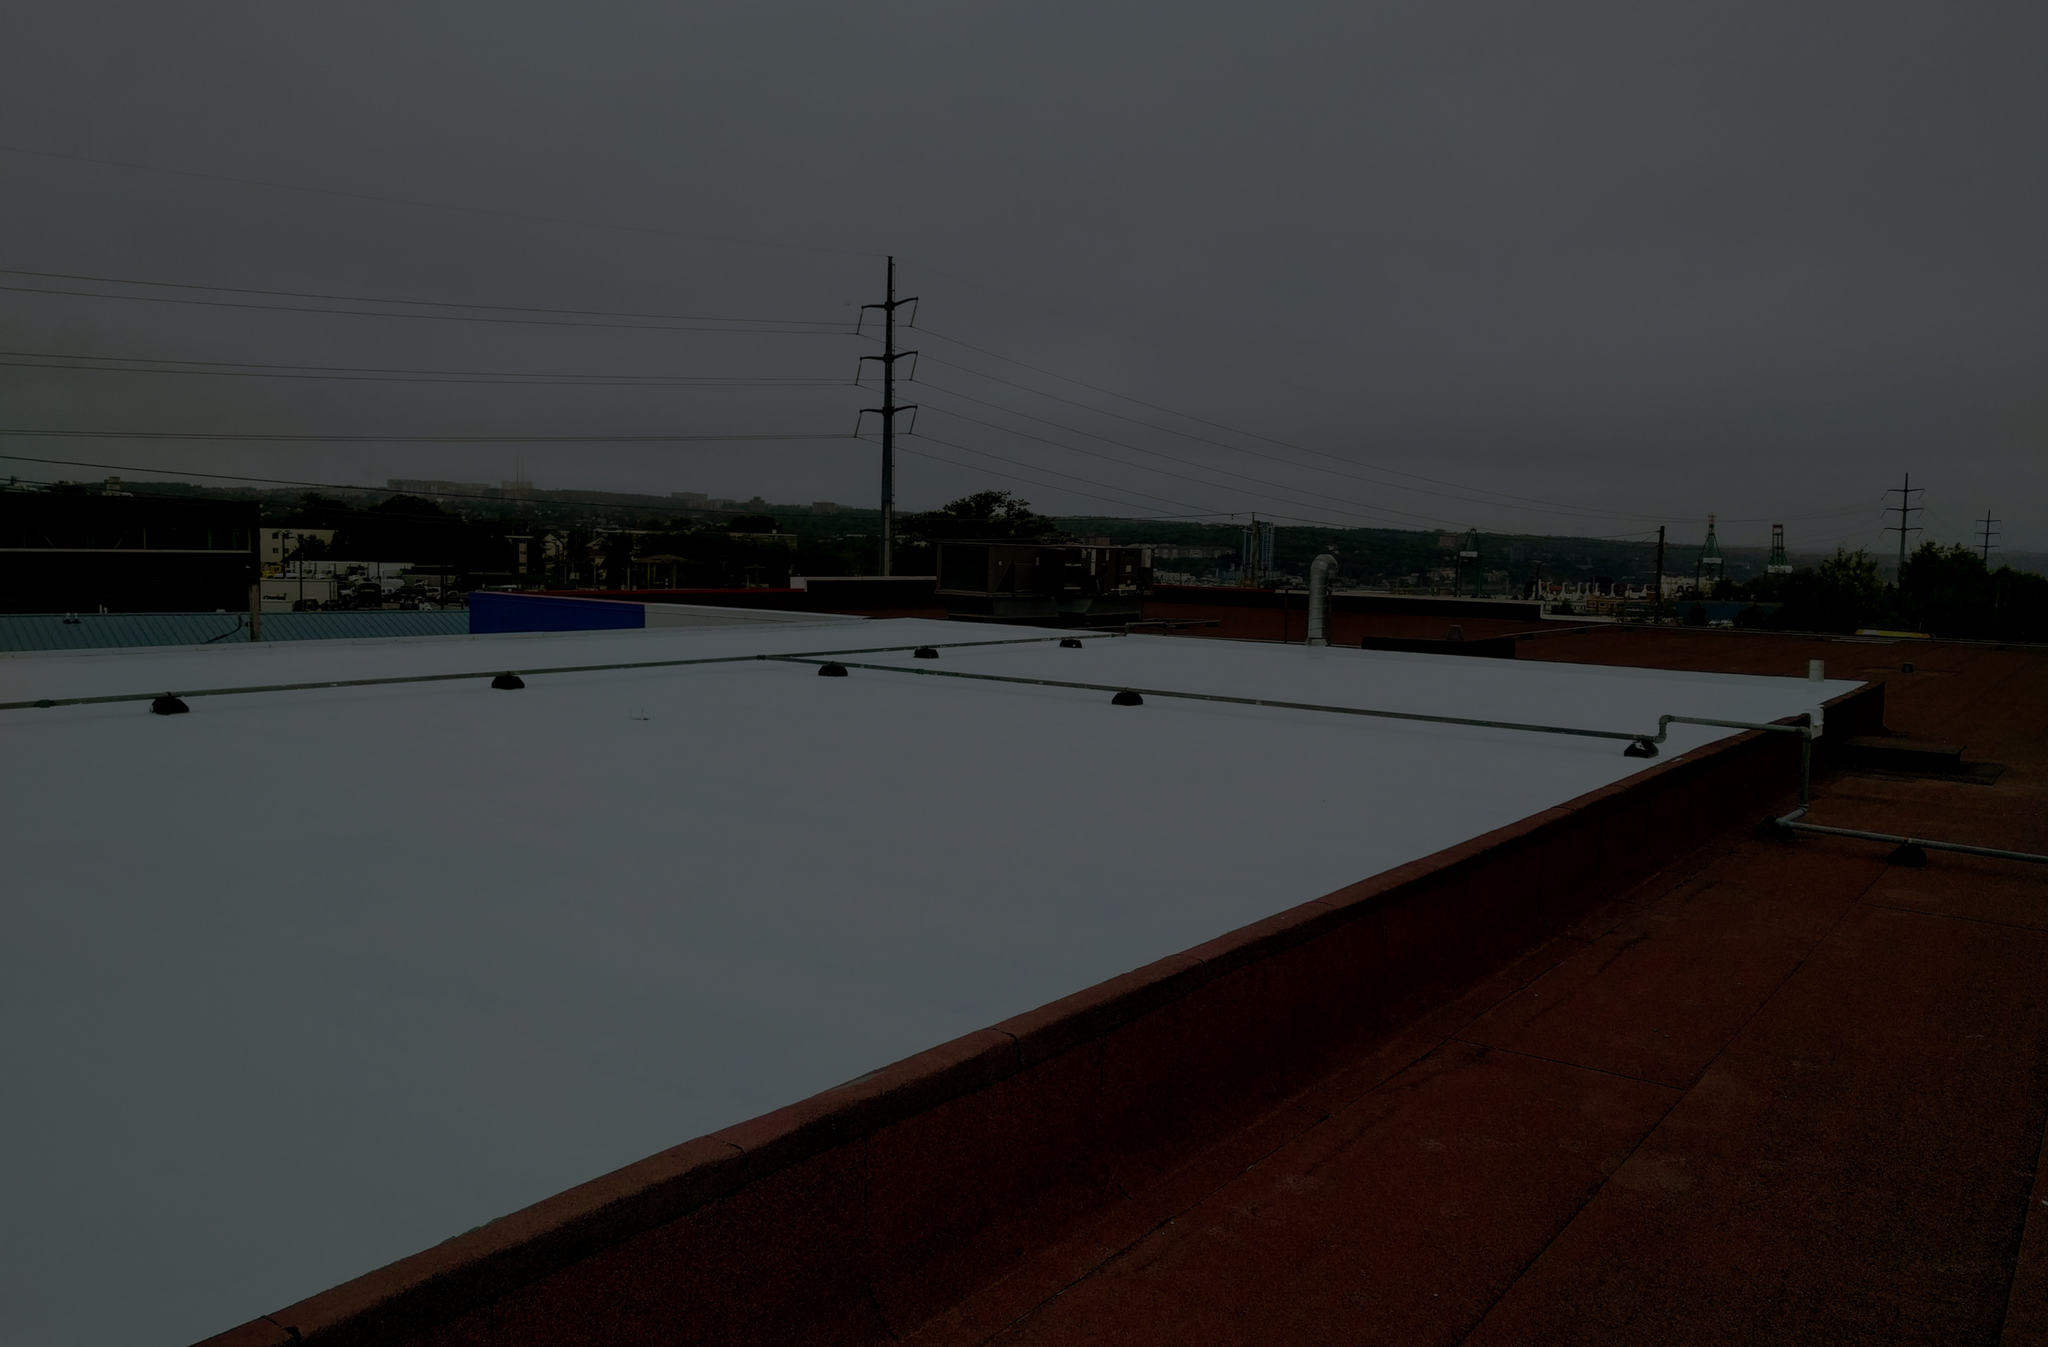 commercial flat roof